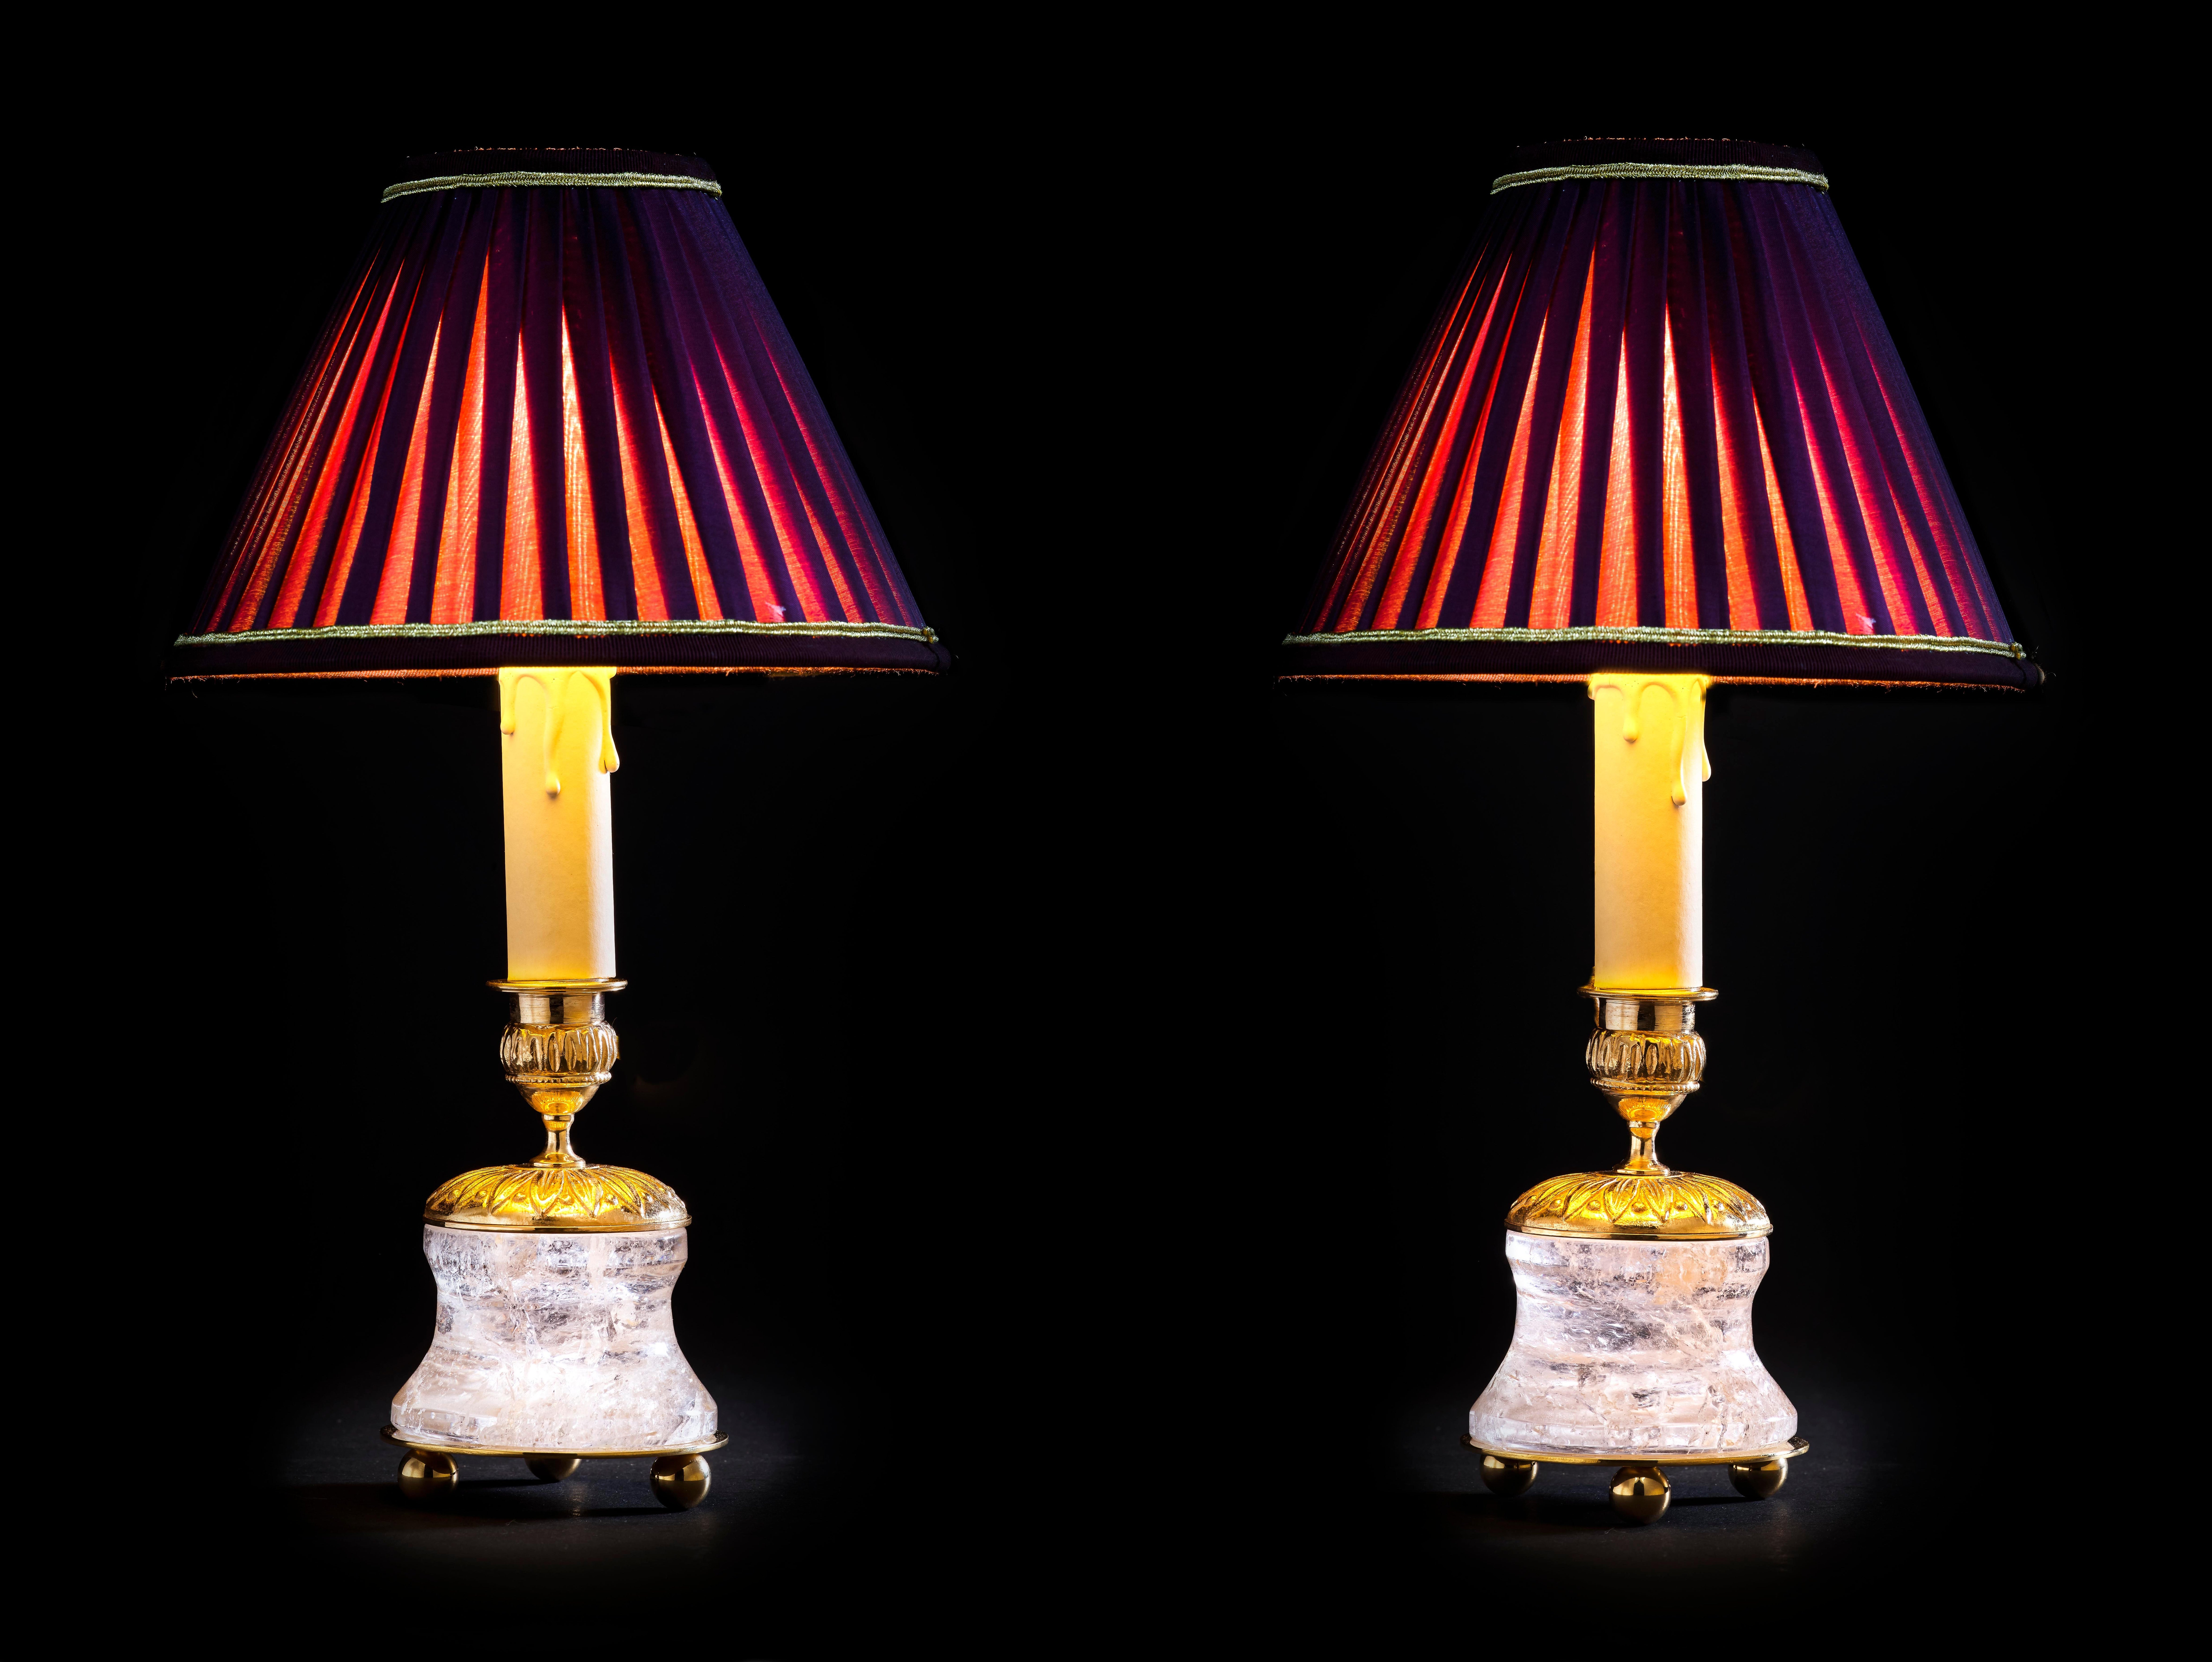 Rock crystal French First Empire style 24-karat ormolu gilding bronze purple lampshades made by Alexandre Vossion.
This model can be also used as candlesticks to make your dining table so chic...
Others colors for the lampshades are also available